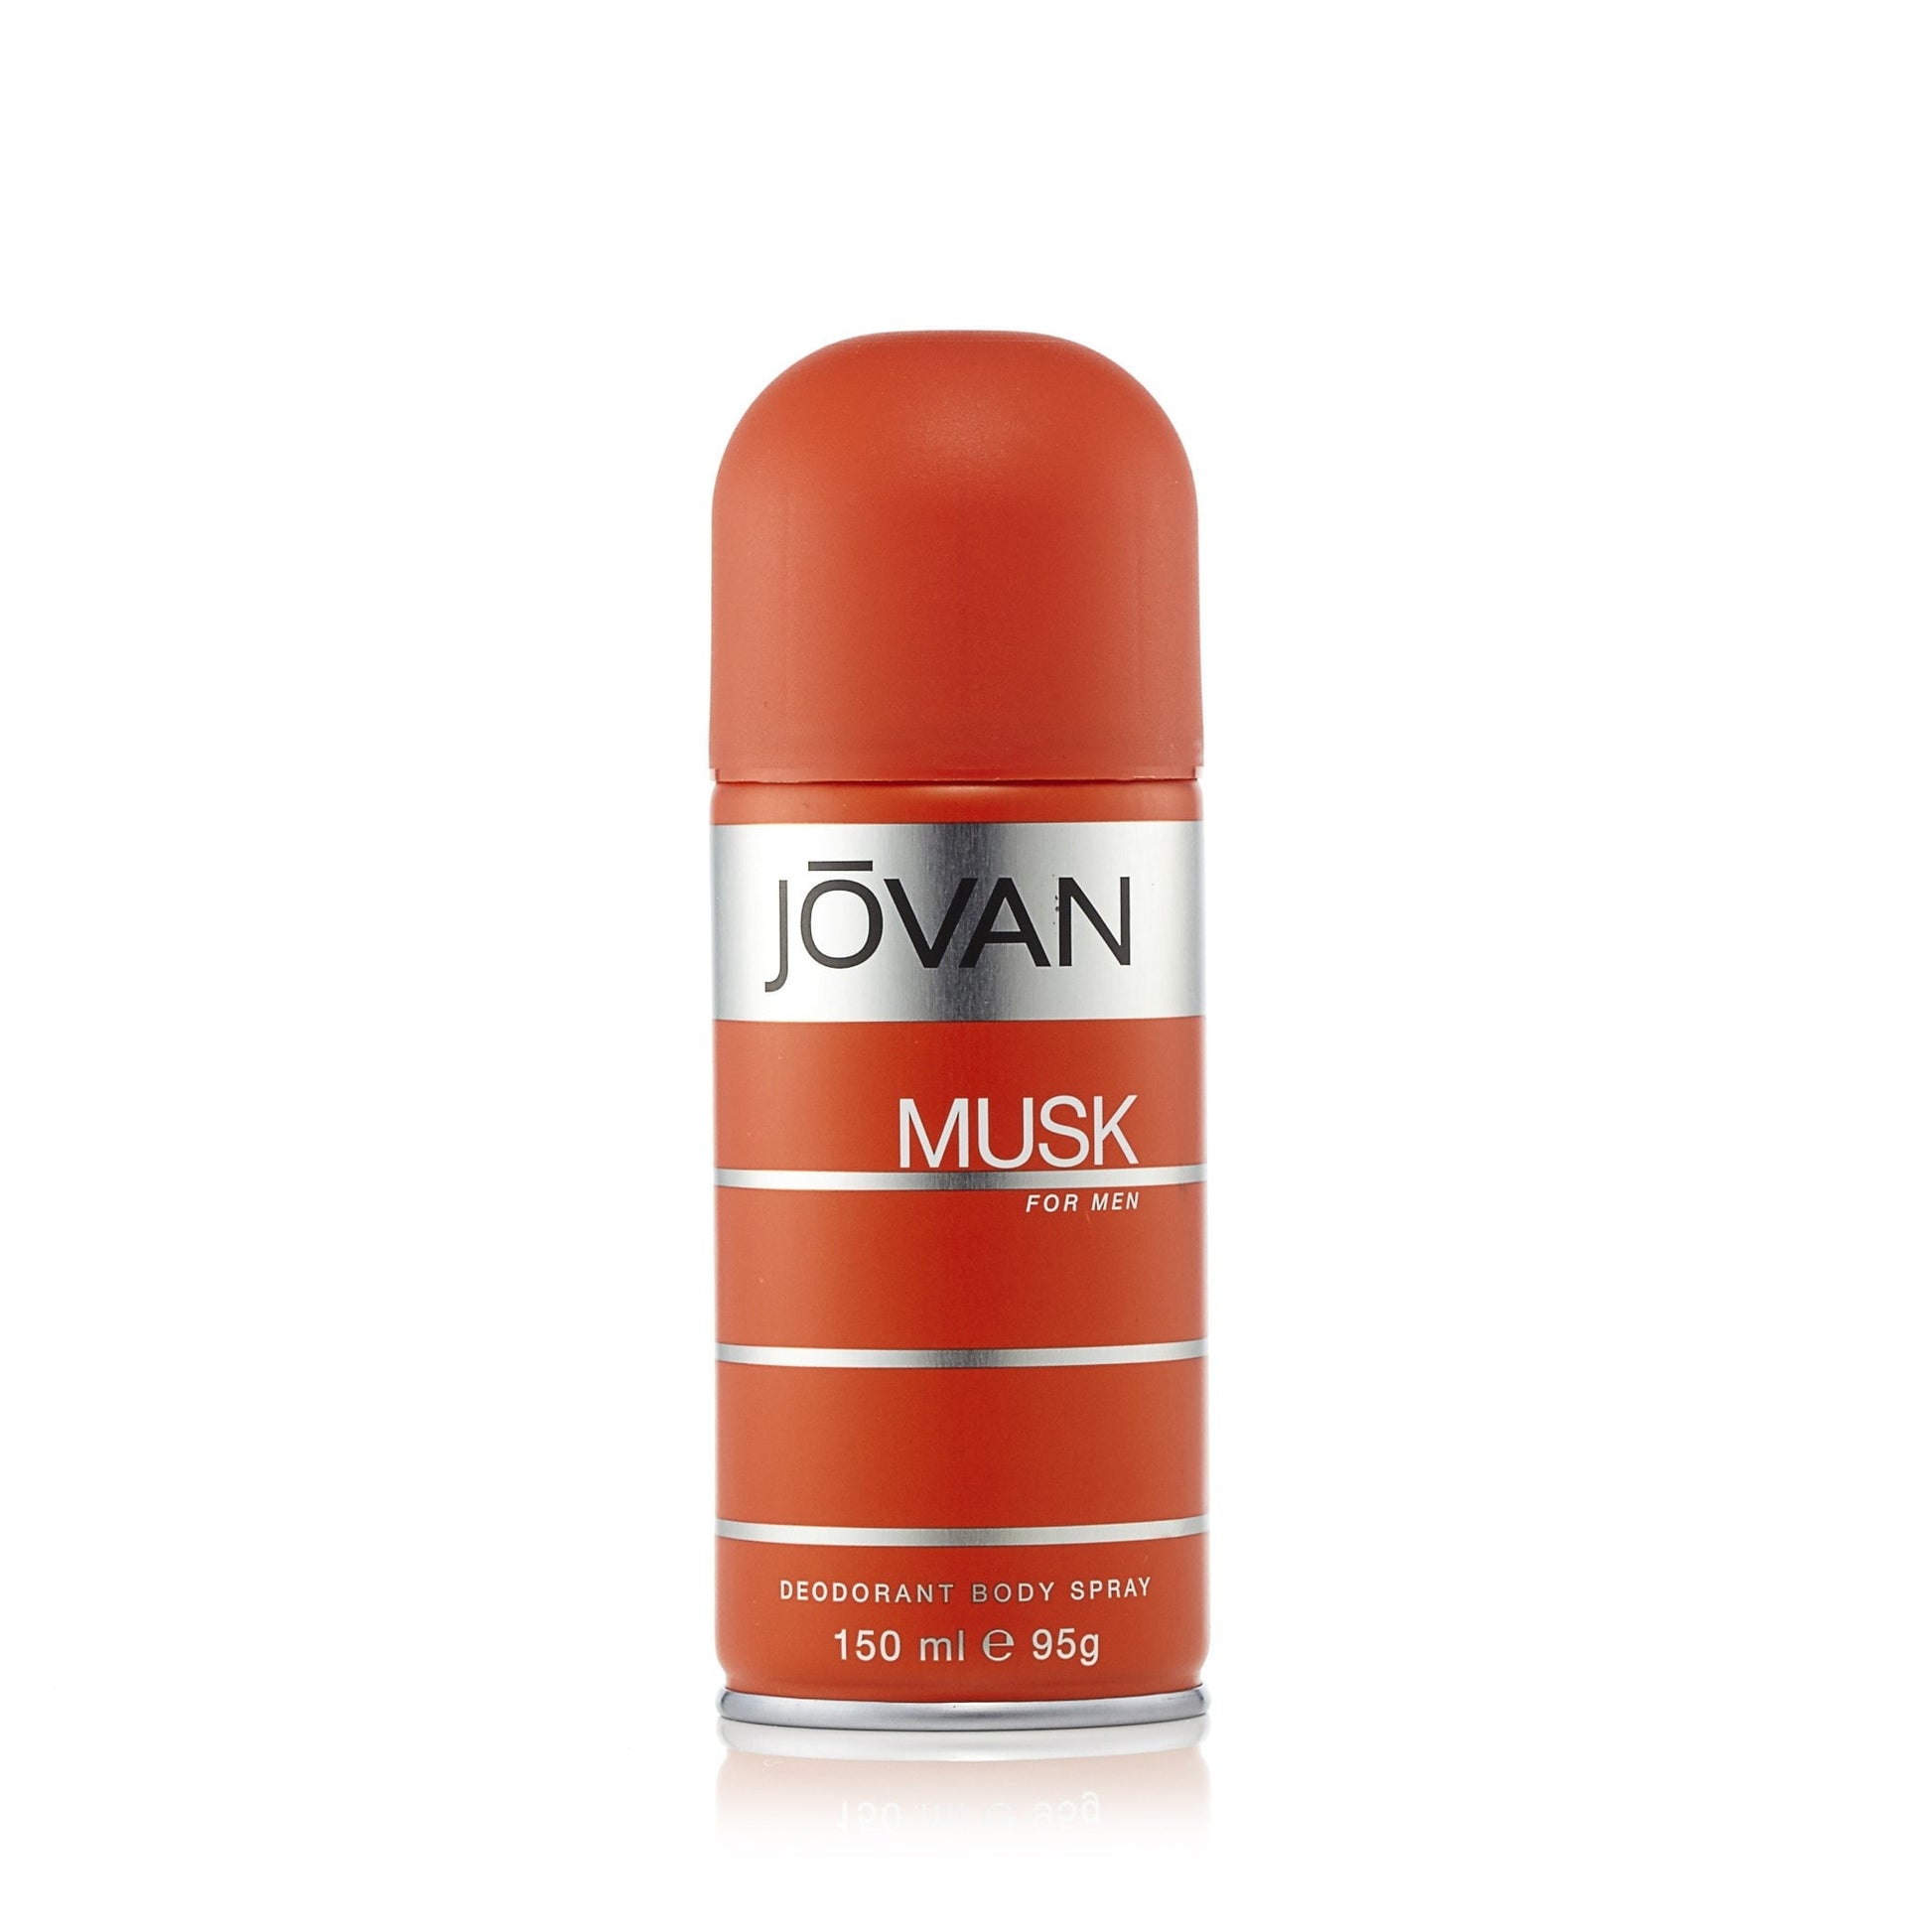 Jovan Musk Deodorant Body Spray for Men by Coty 5.0 oz. Click to open in modal